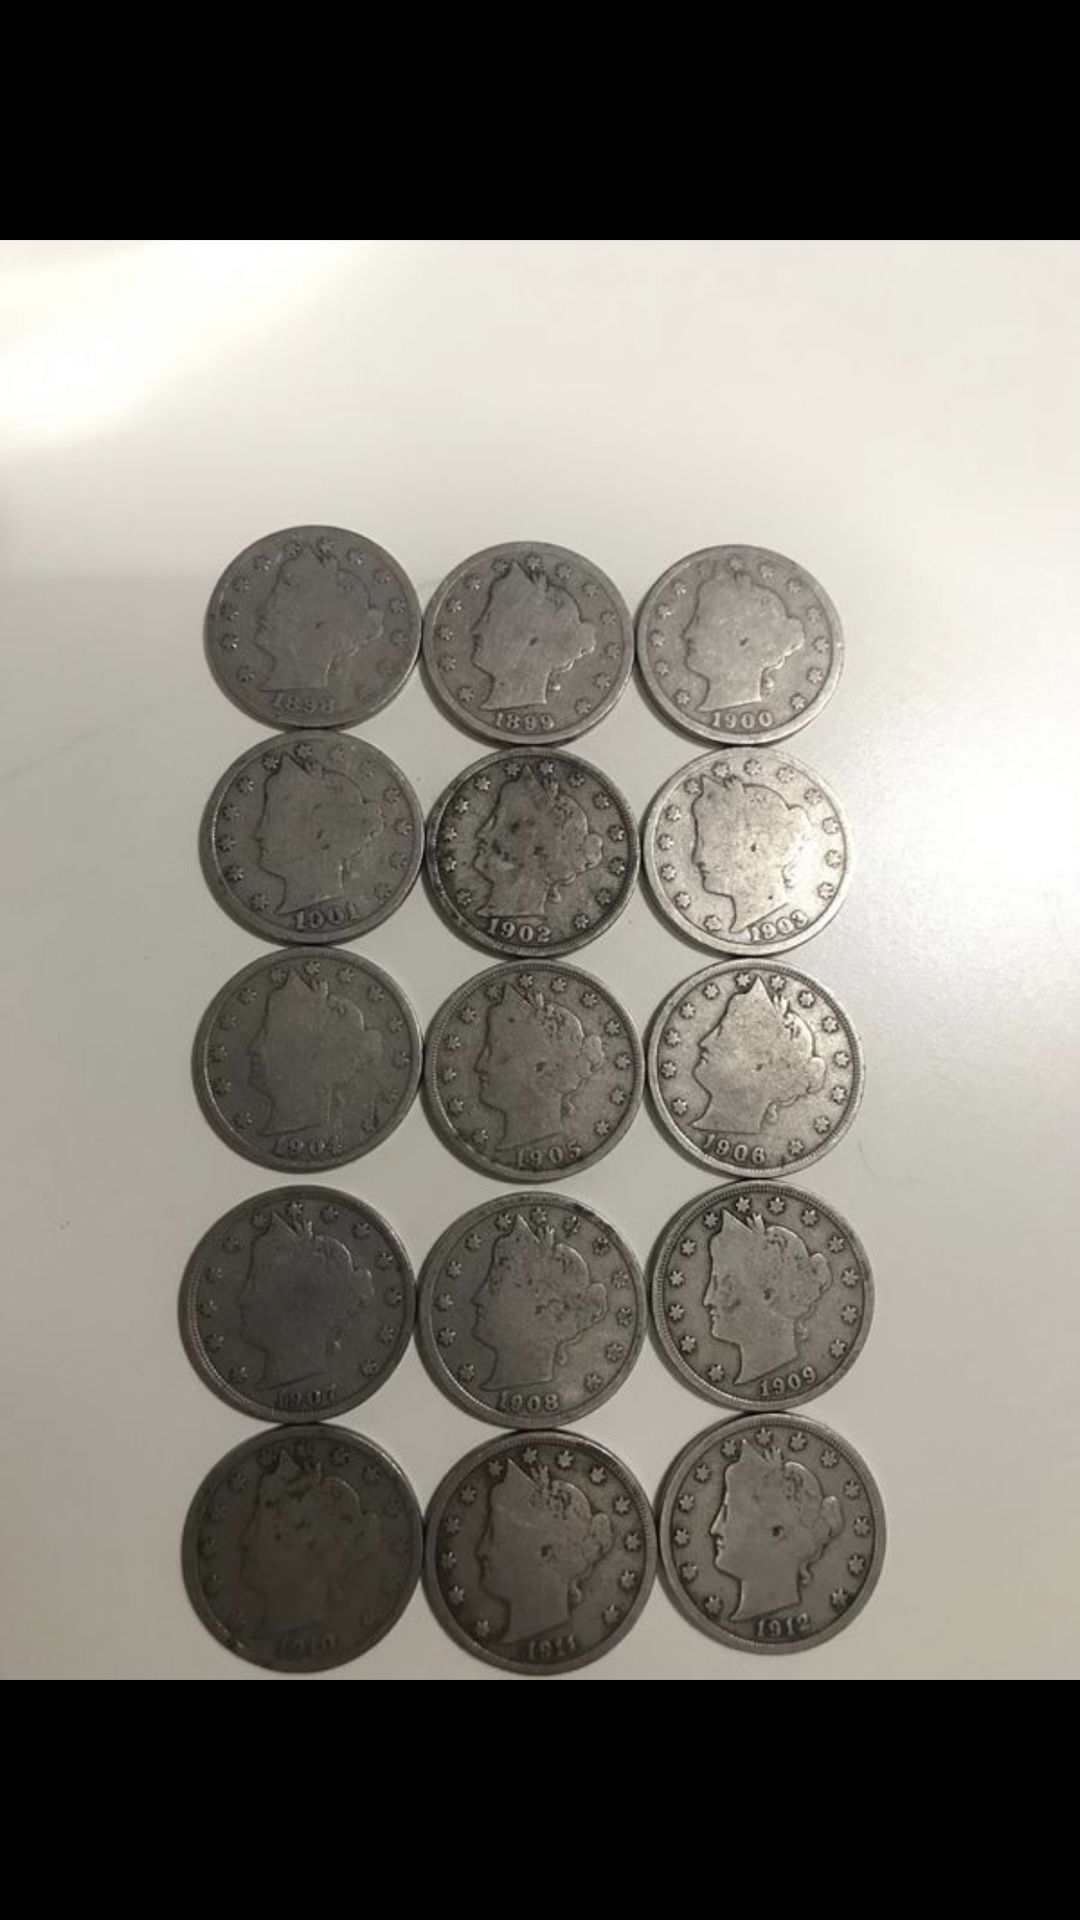 Liberty nickels 15 pieces /consecutive dates 1898 to 1912